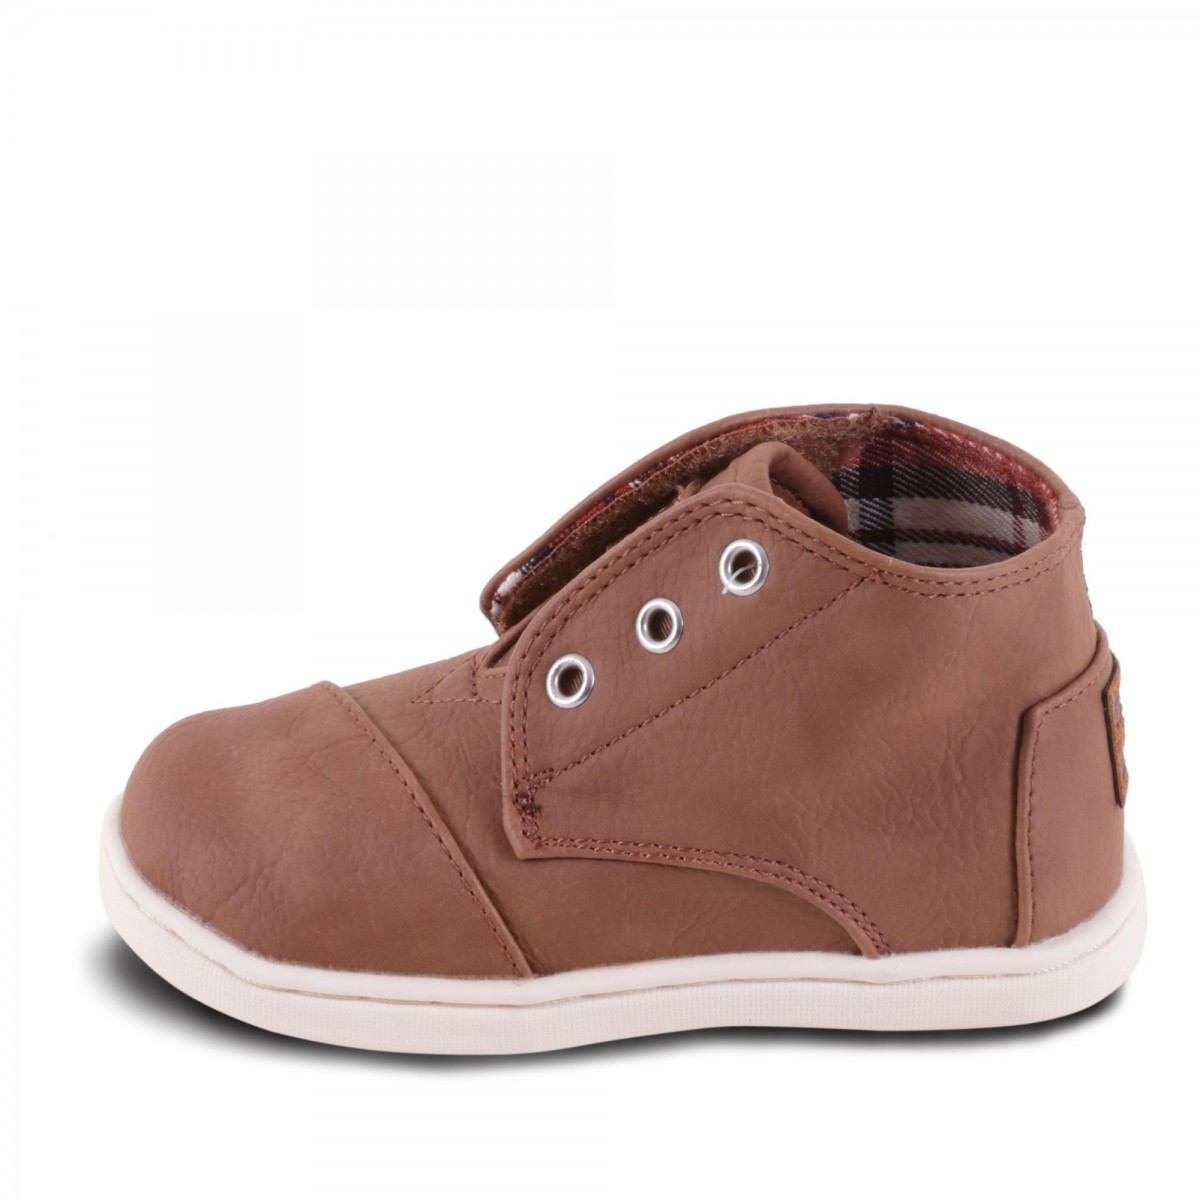 PASEO MID SYNTHETIC LEATHER